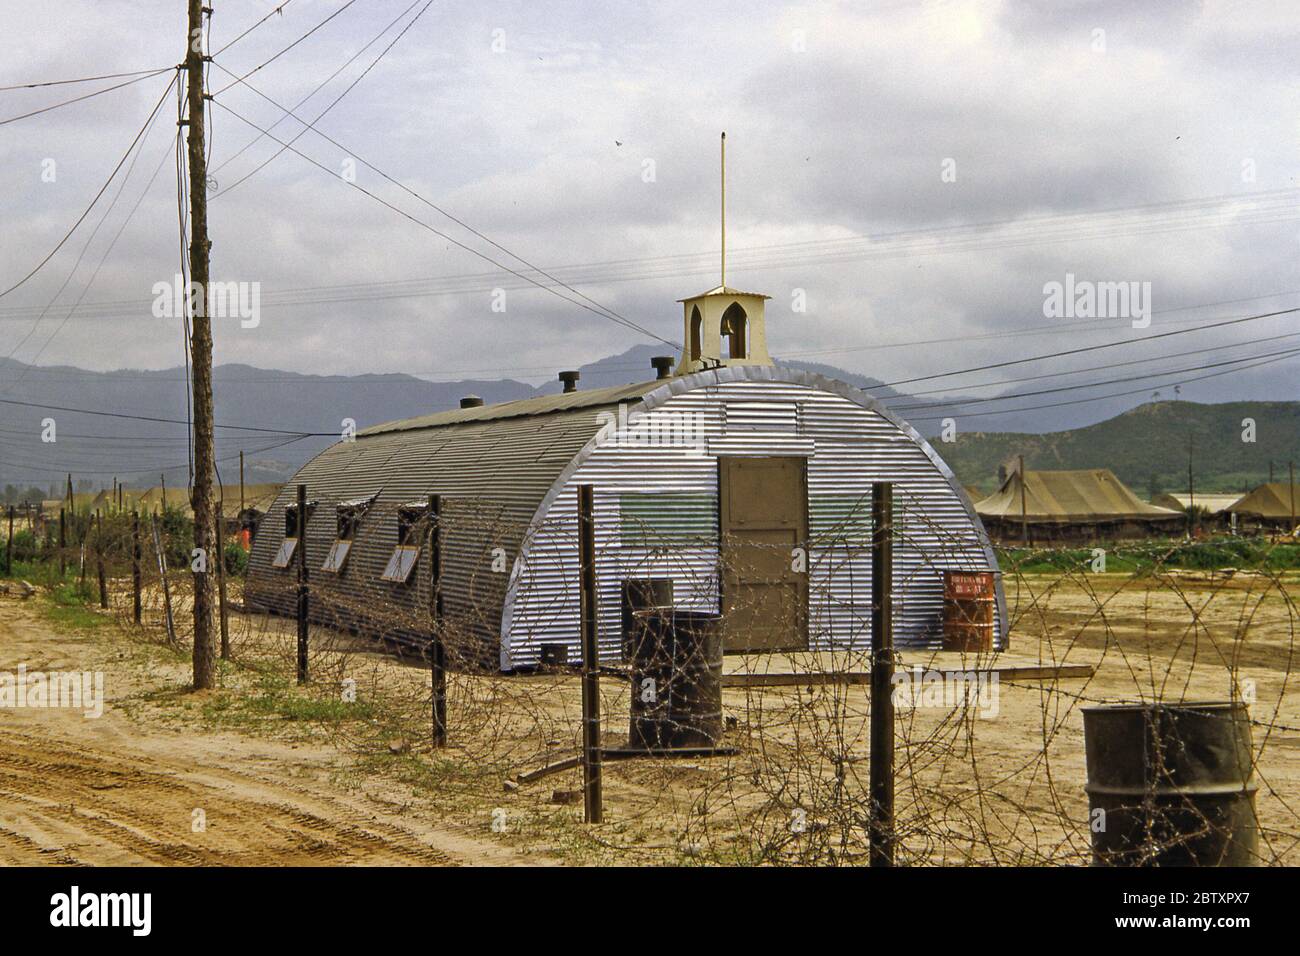 A meeting building/church made from a Quonset hut for the US Army's 40th Infantry, Division Replacement Company during the Korean War campaign, South Korea, 1953. A Quonset hut is a lightweight prefabricated structure of corrugated galvanized steel having a semi-circular cross-section. The design was developed in the United States, based on the Nissen hut first made by the British during World War I. Hundreds of thousands were produced during World War II. The name comes from the site of their first manufacture at Quonset Point, Davisville, Rhode Island. Stock Photo